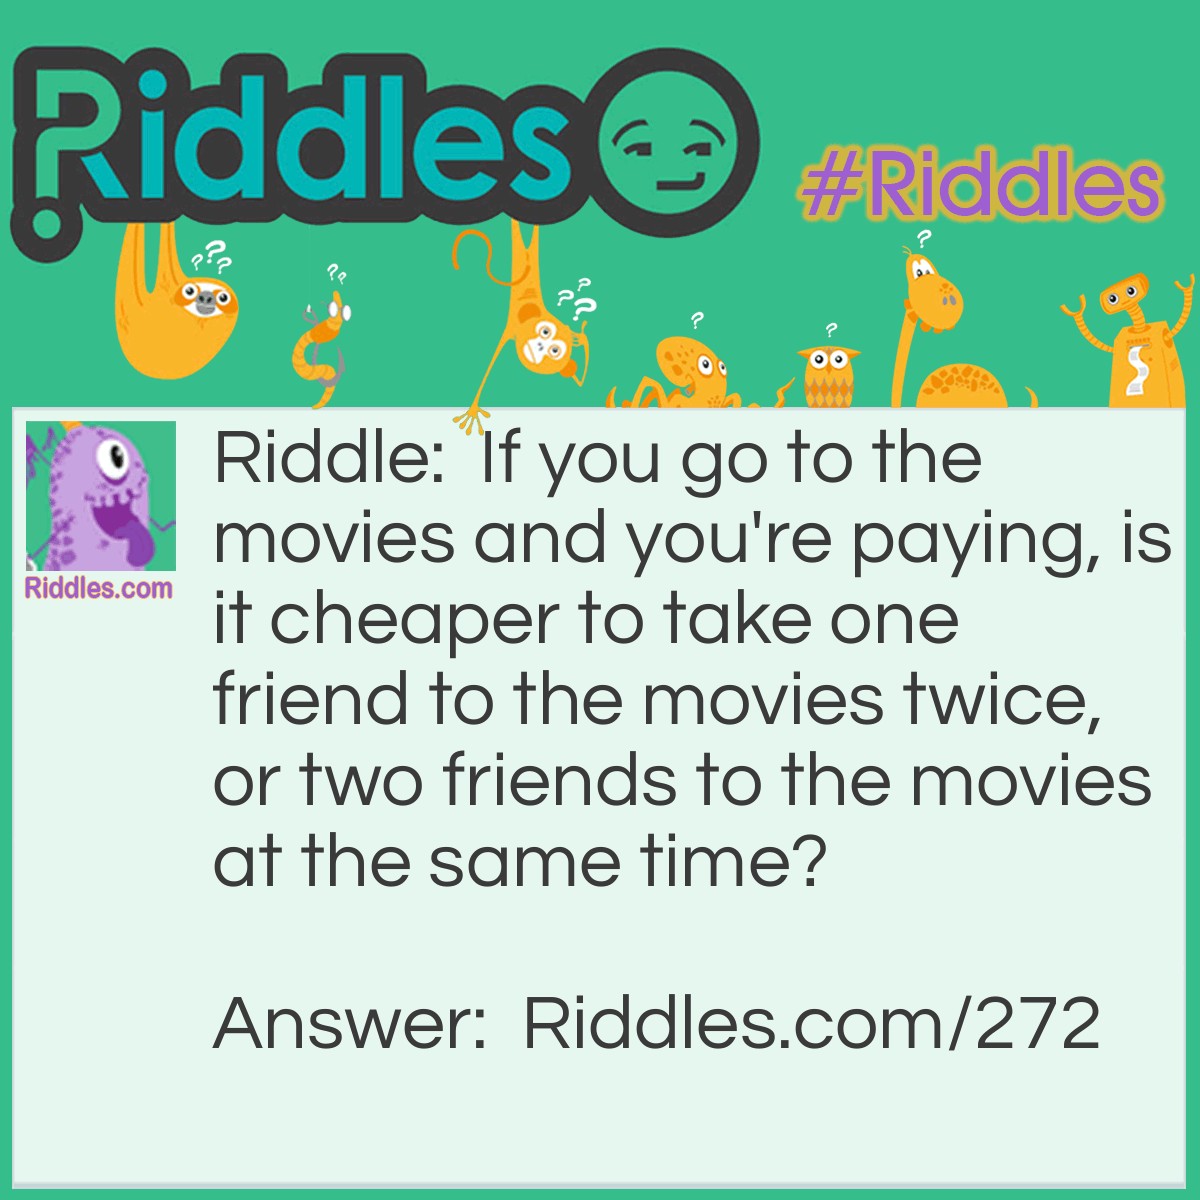 Riddle: If you go to the movies and you're paying, is it cheaper to take one friend to the movies twice, or two friends to the movies at the same time? Answer: It's cheaper to take two friends at the same time. In this case, you would only be buying three tickets, whereas if you take the same friend twice you are buying four tickets.